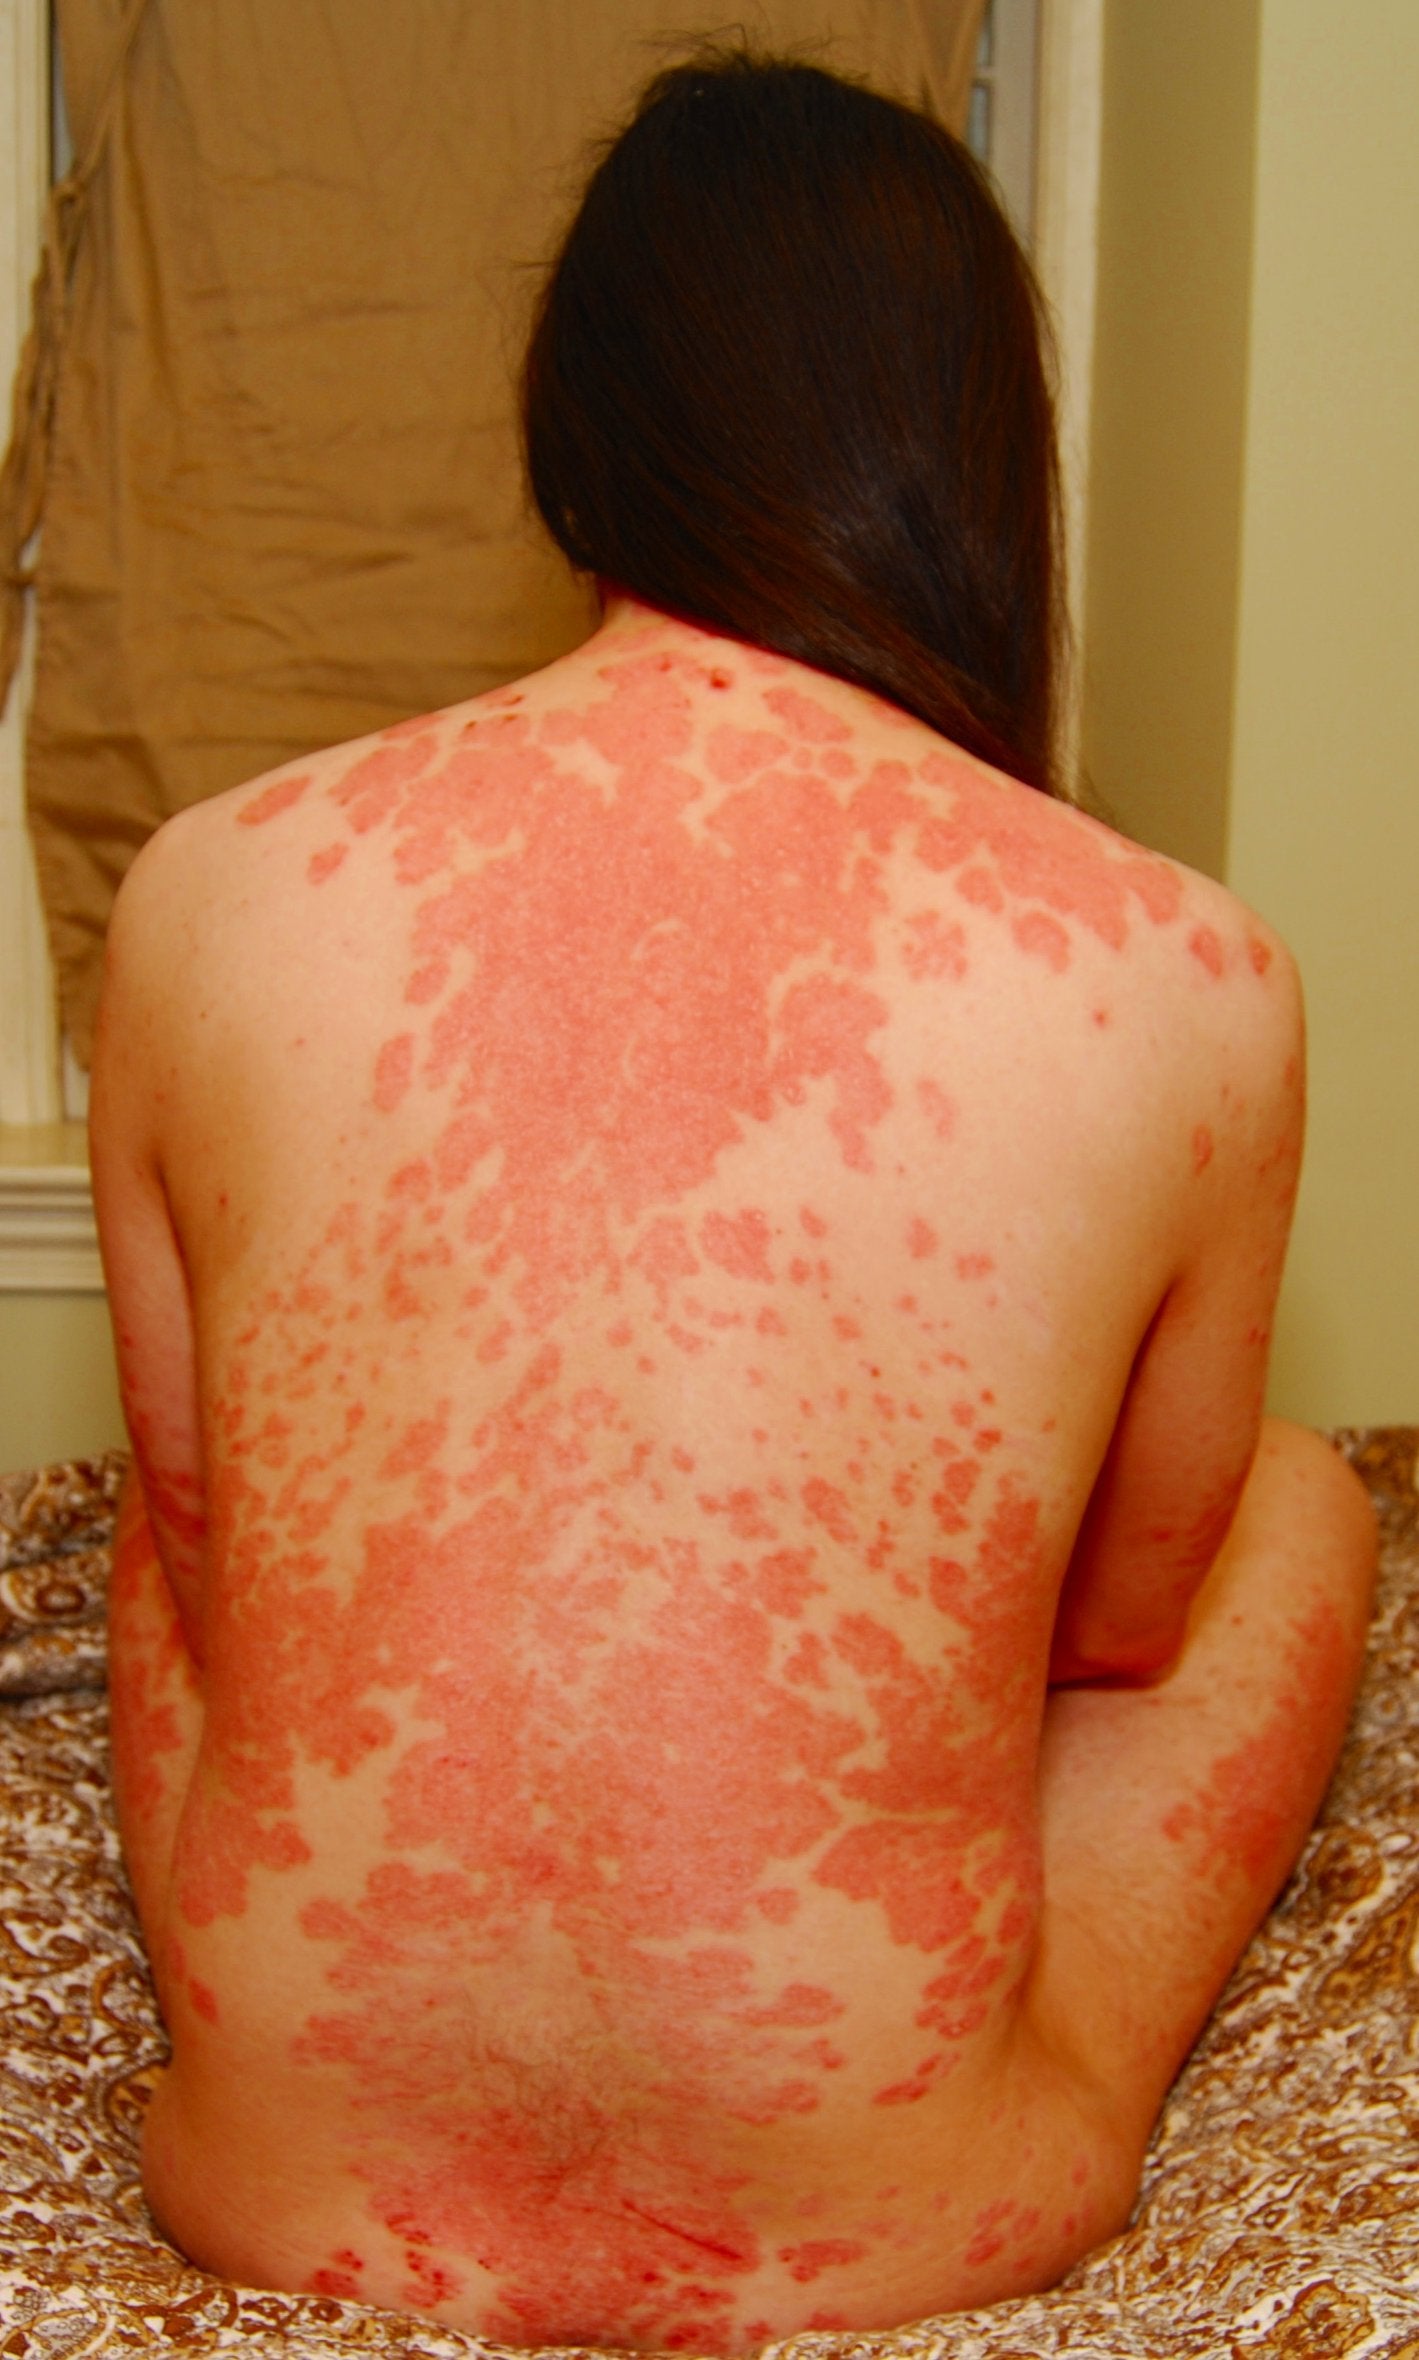 Dear reddit, I have severe psoriasis over almost 90% of my ...